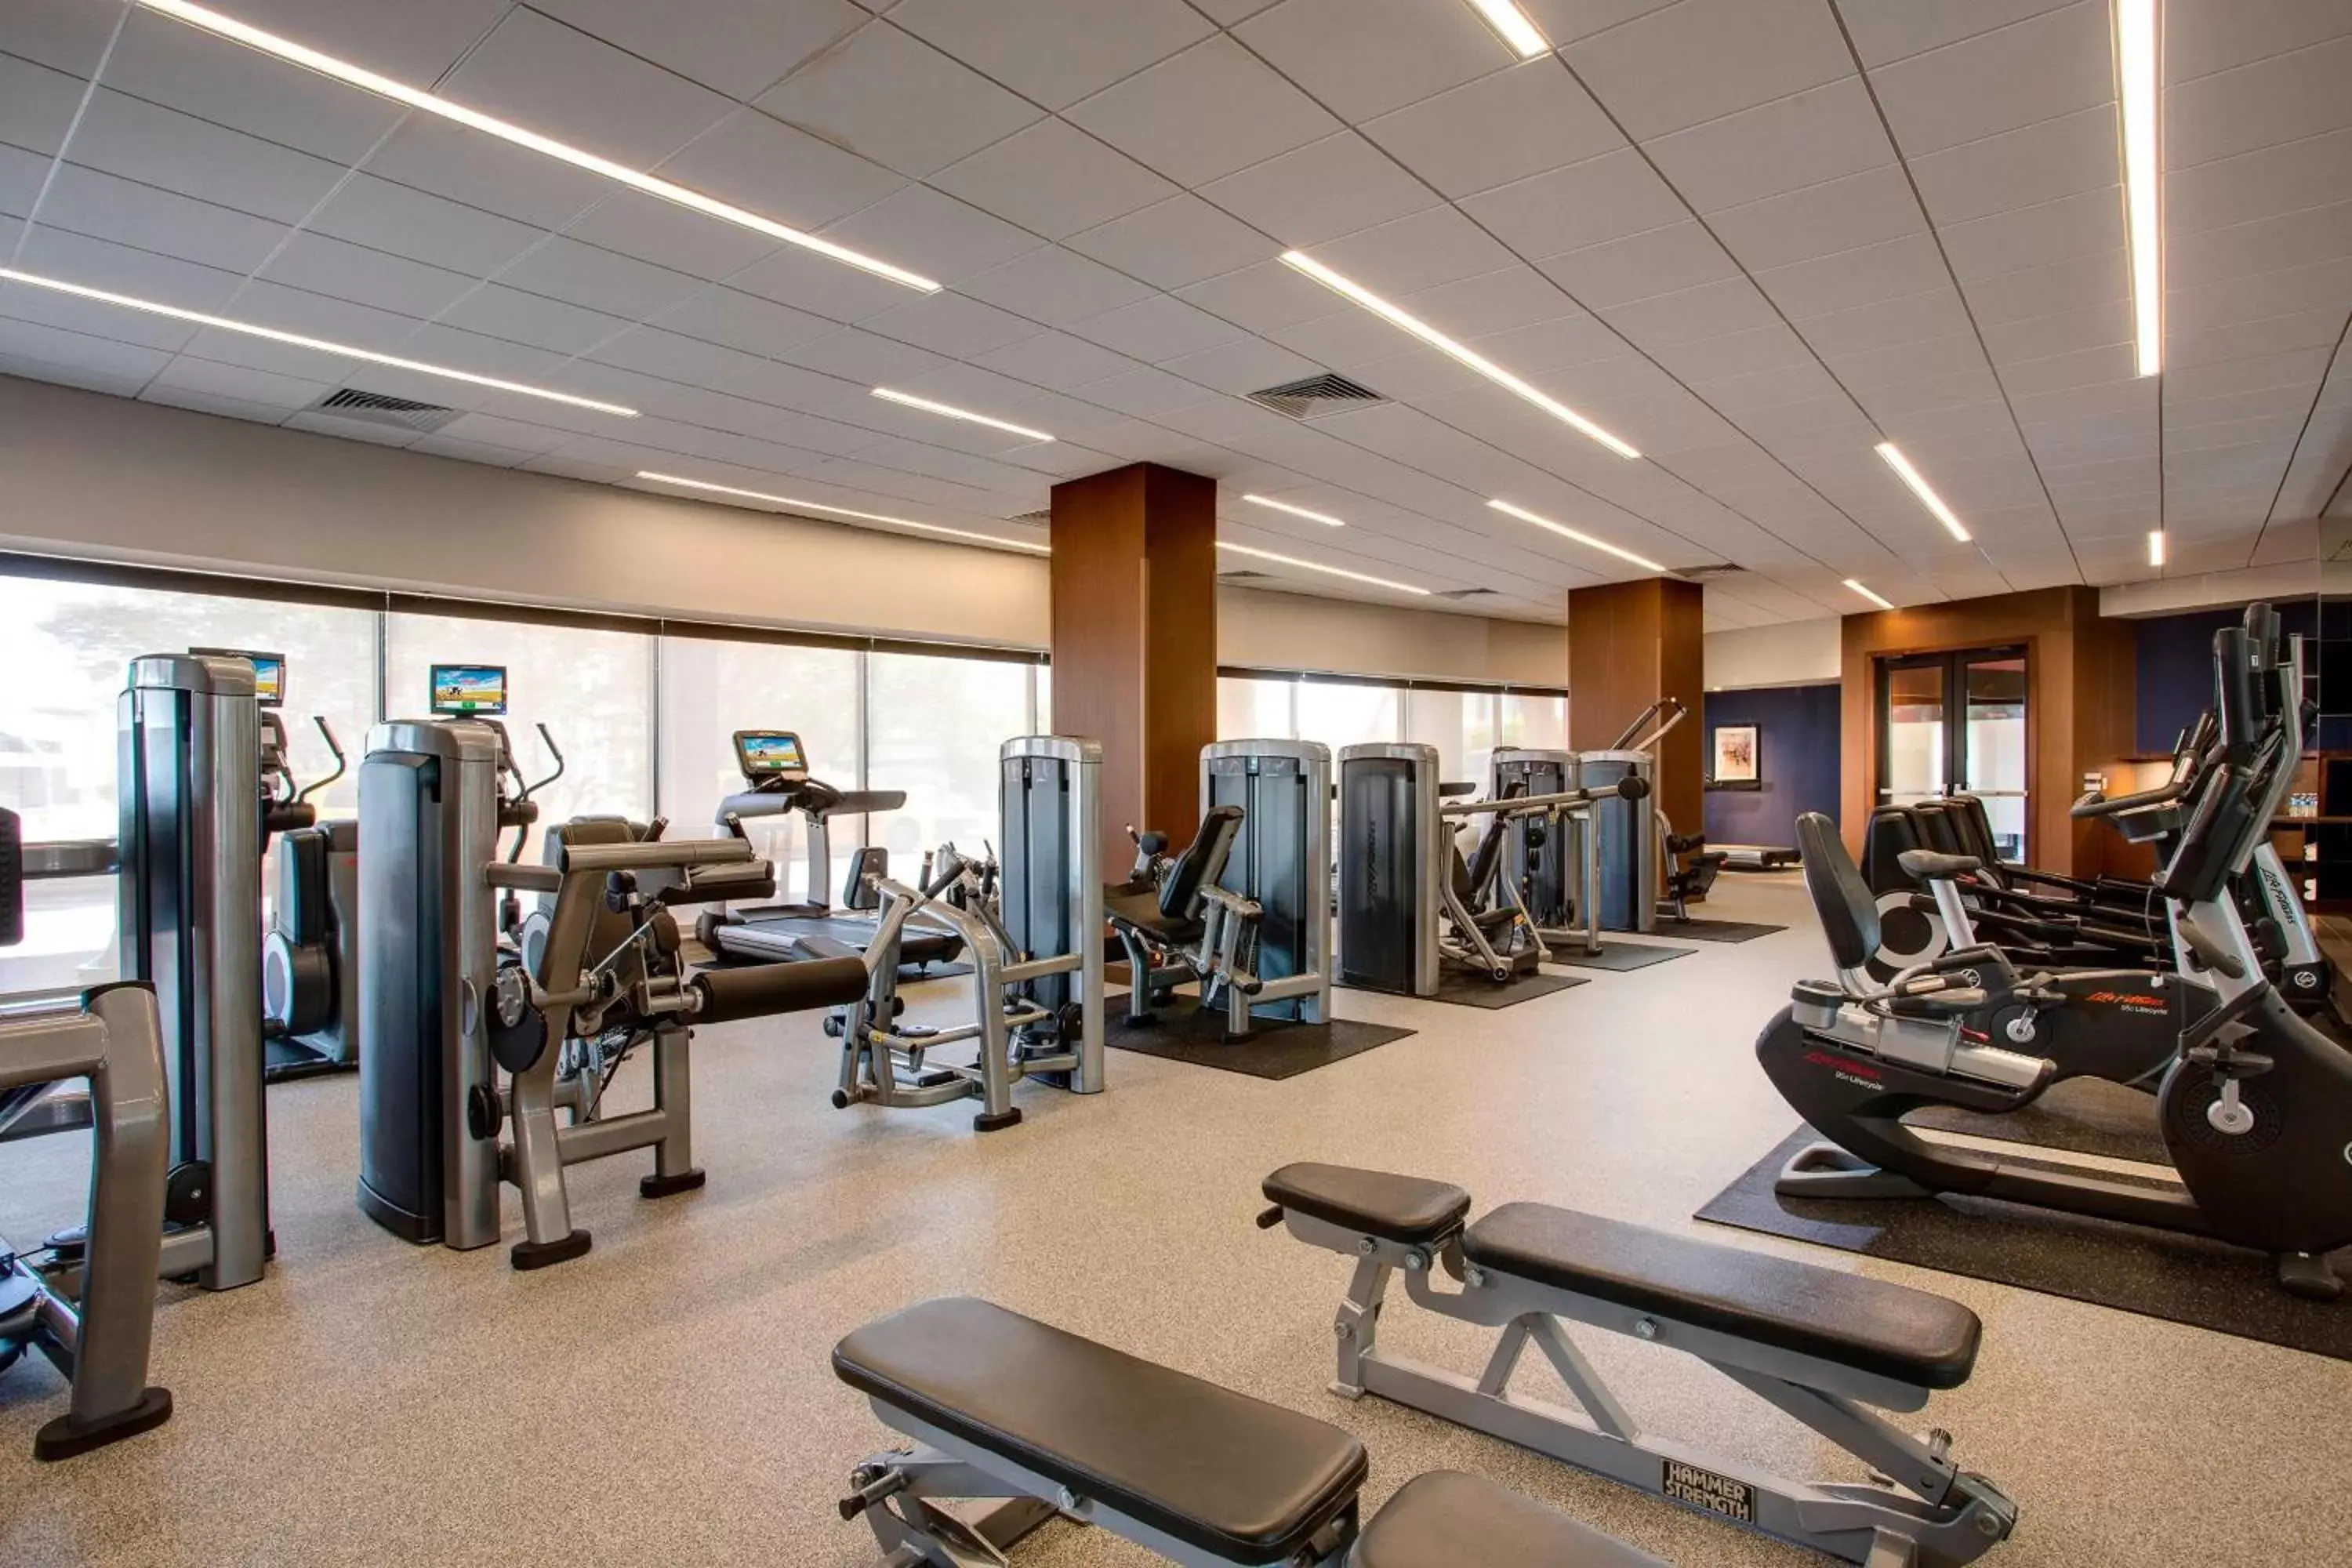 Fitness centre/facilities, Fitness Center/Facilities in Houston Airport Marriott at George Bush Intercontinental